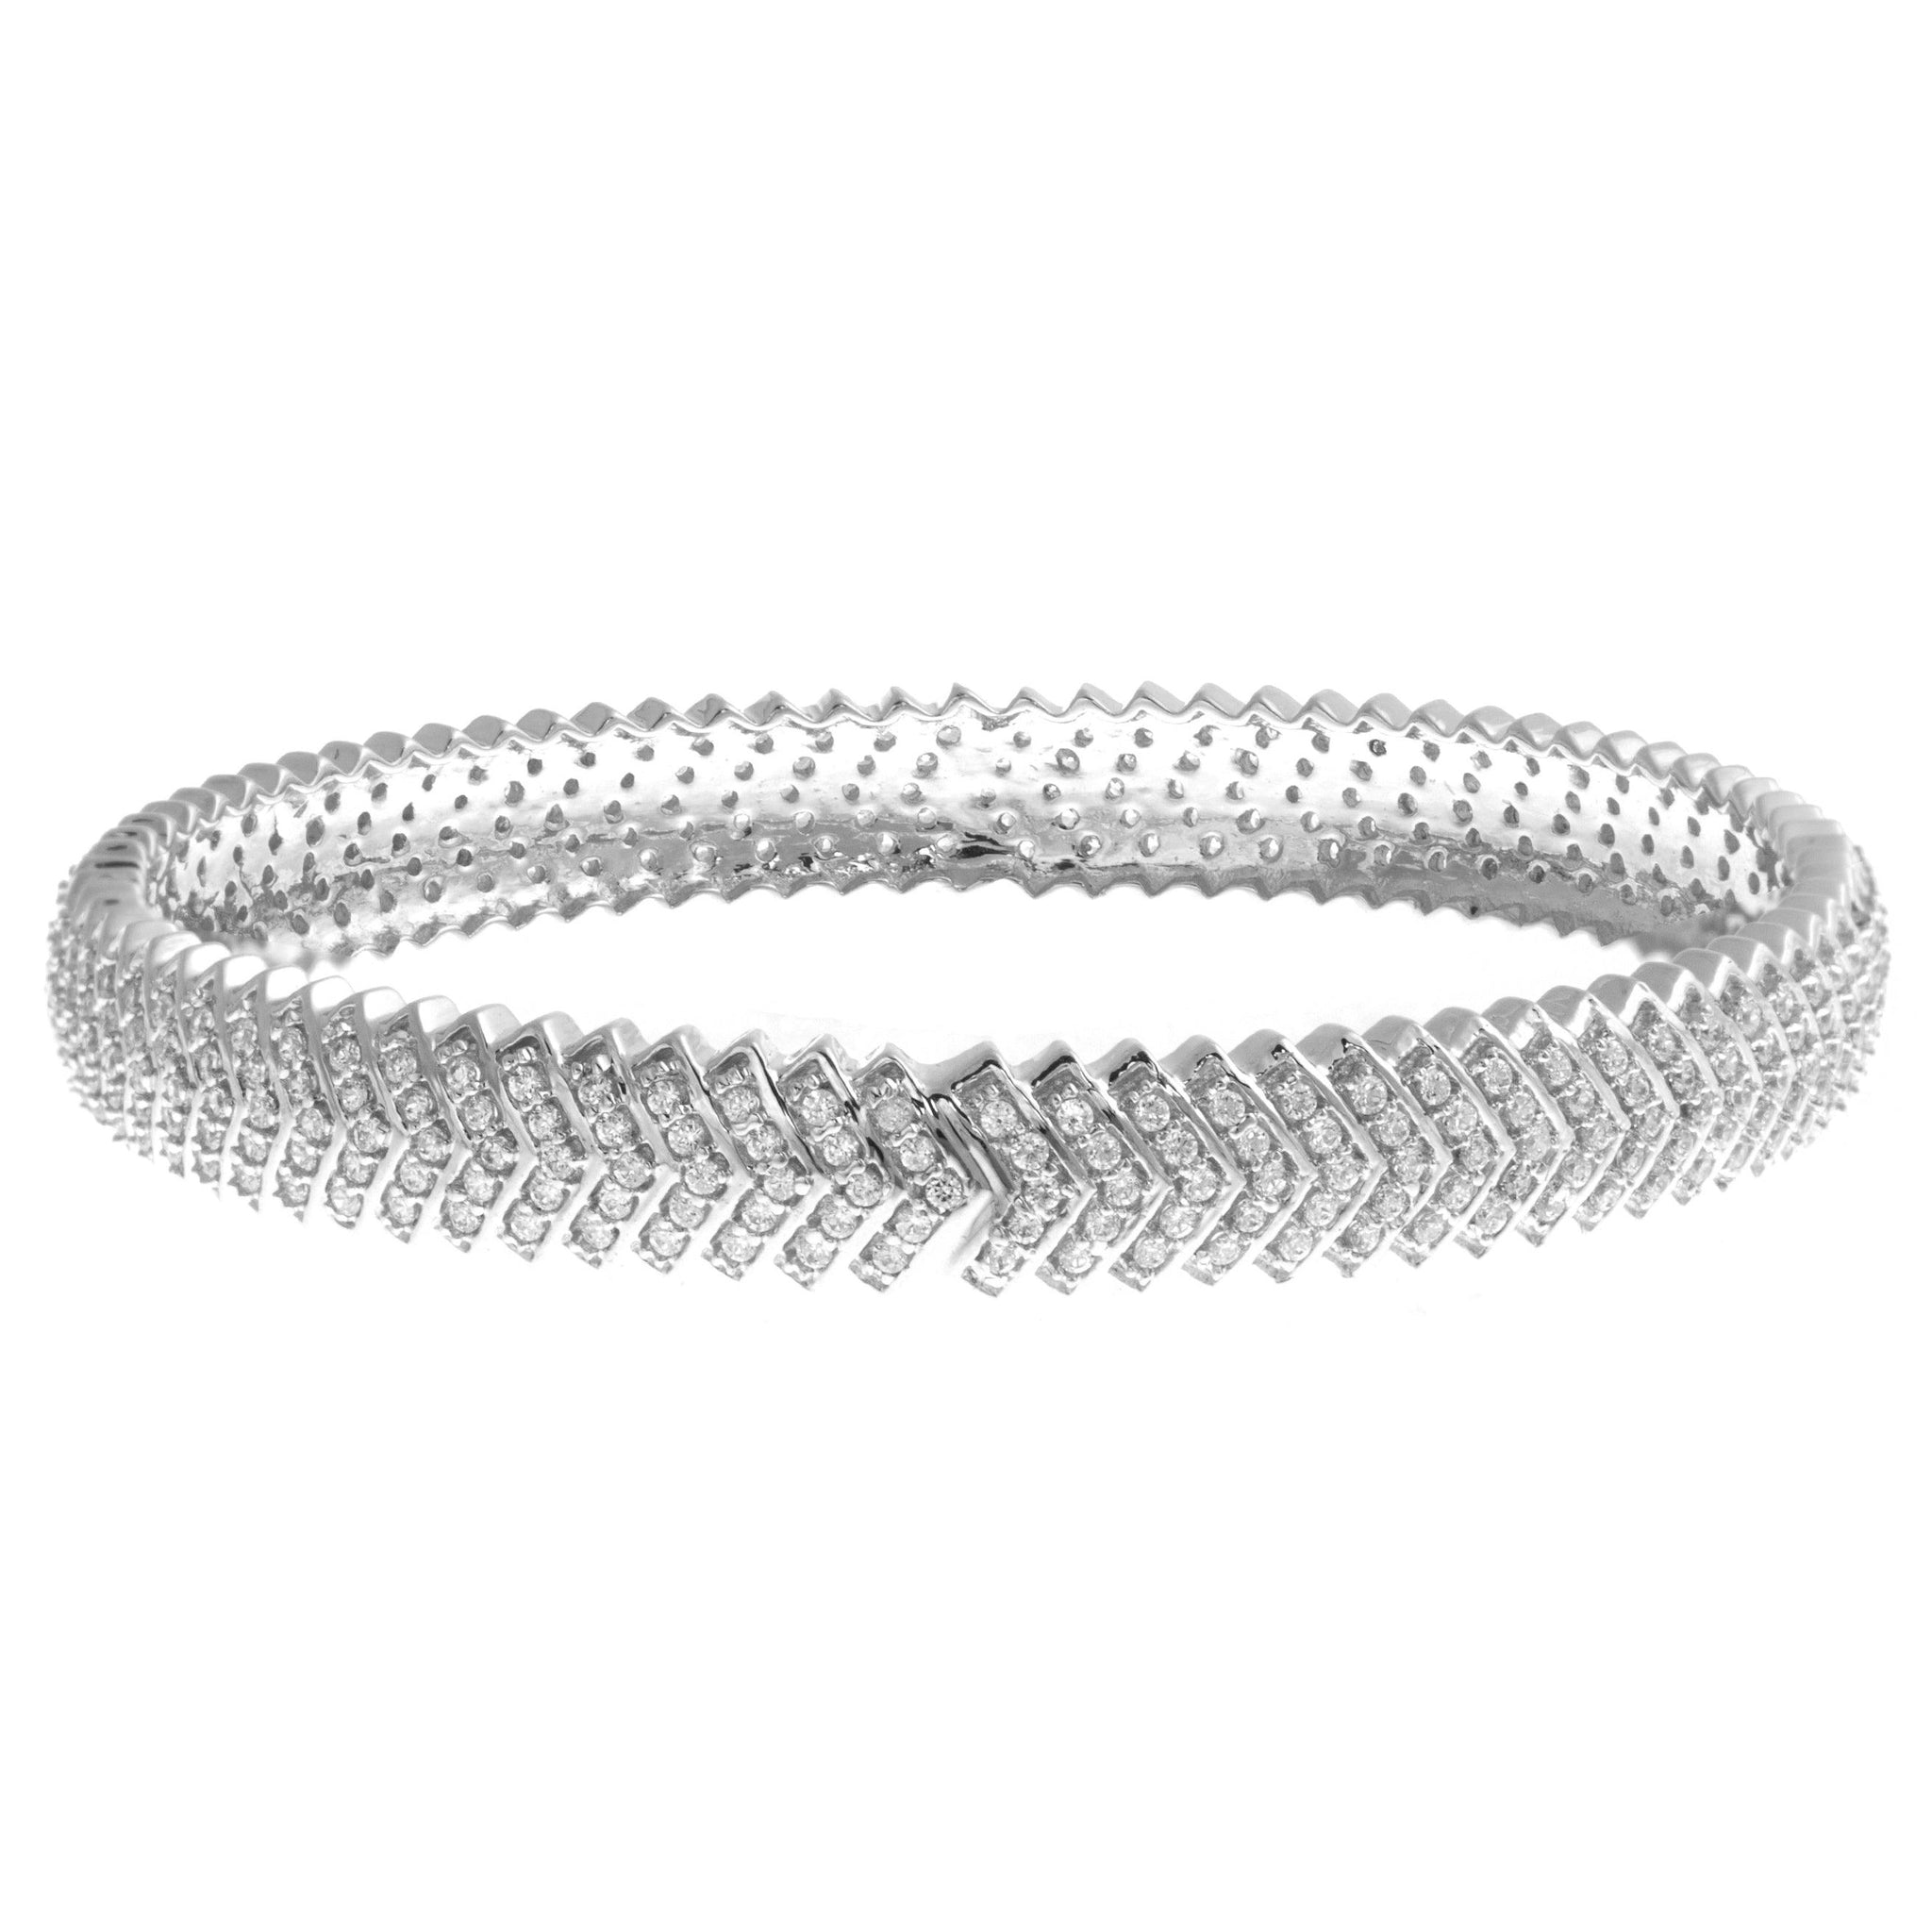 18ct White Gold Bangle with Cubic Zirconia Stones (28.9g) (B-1472)